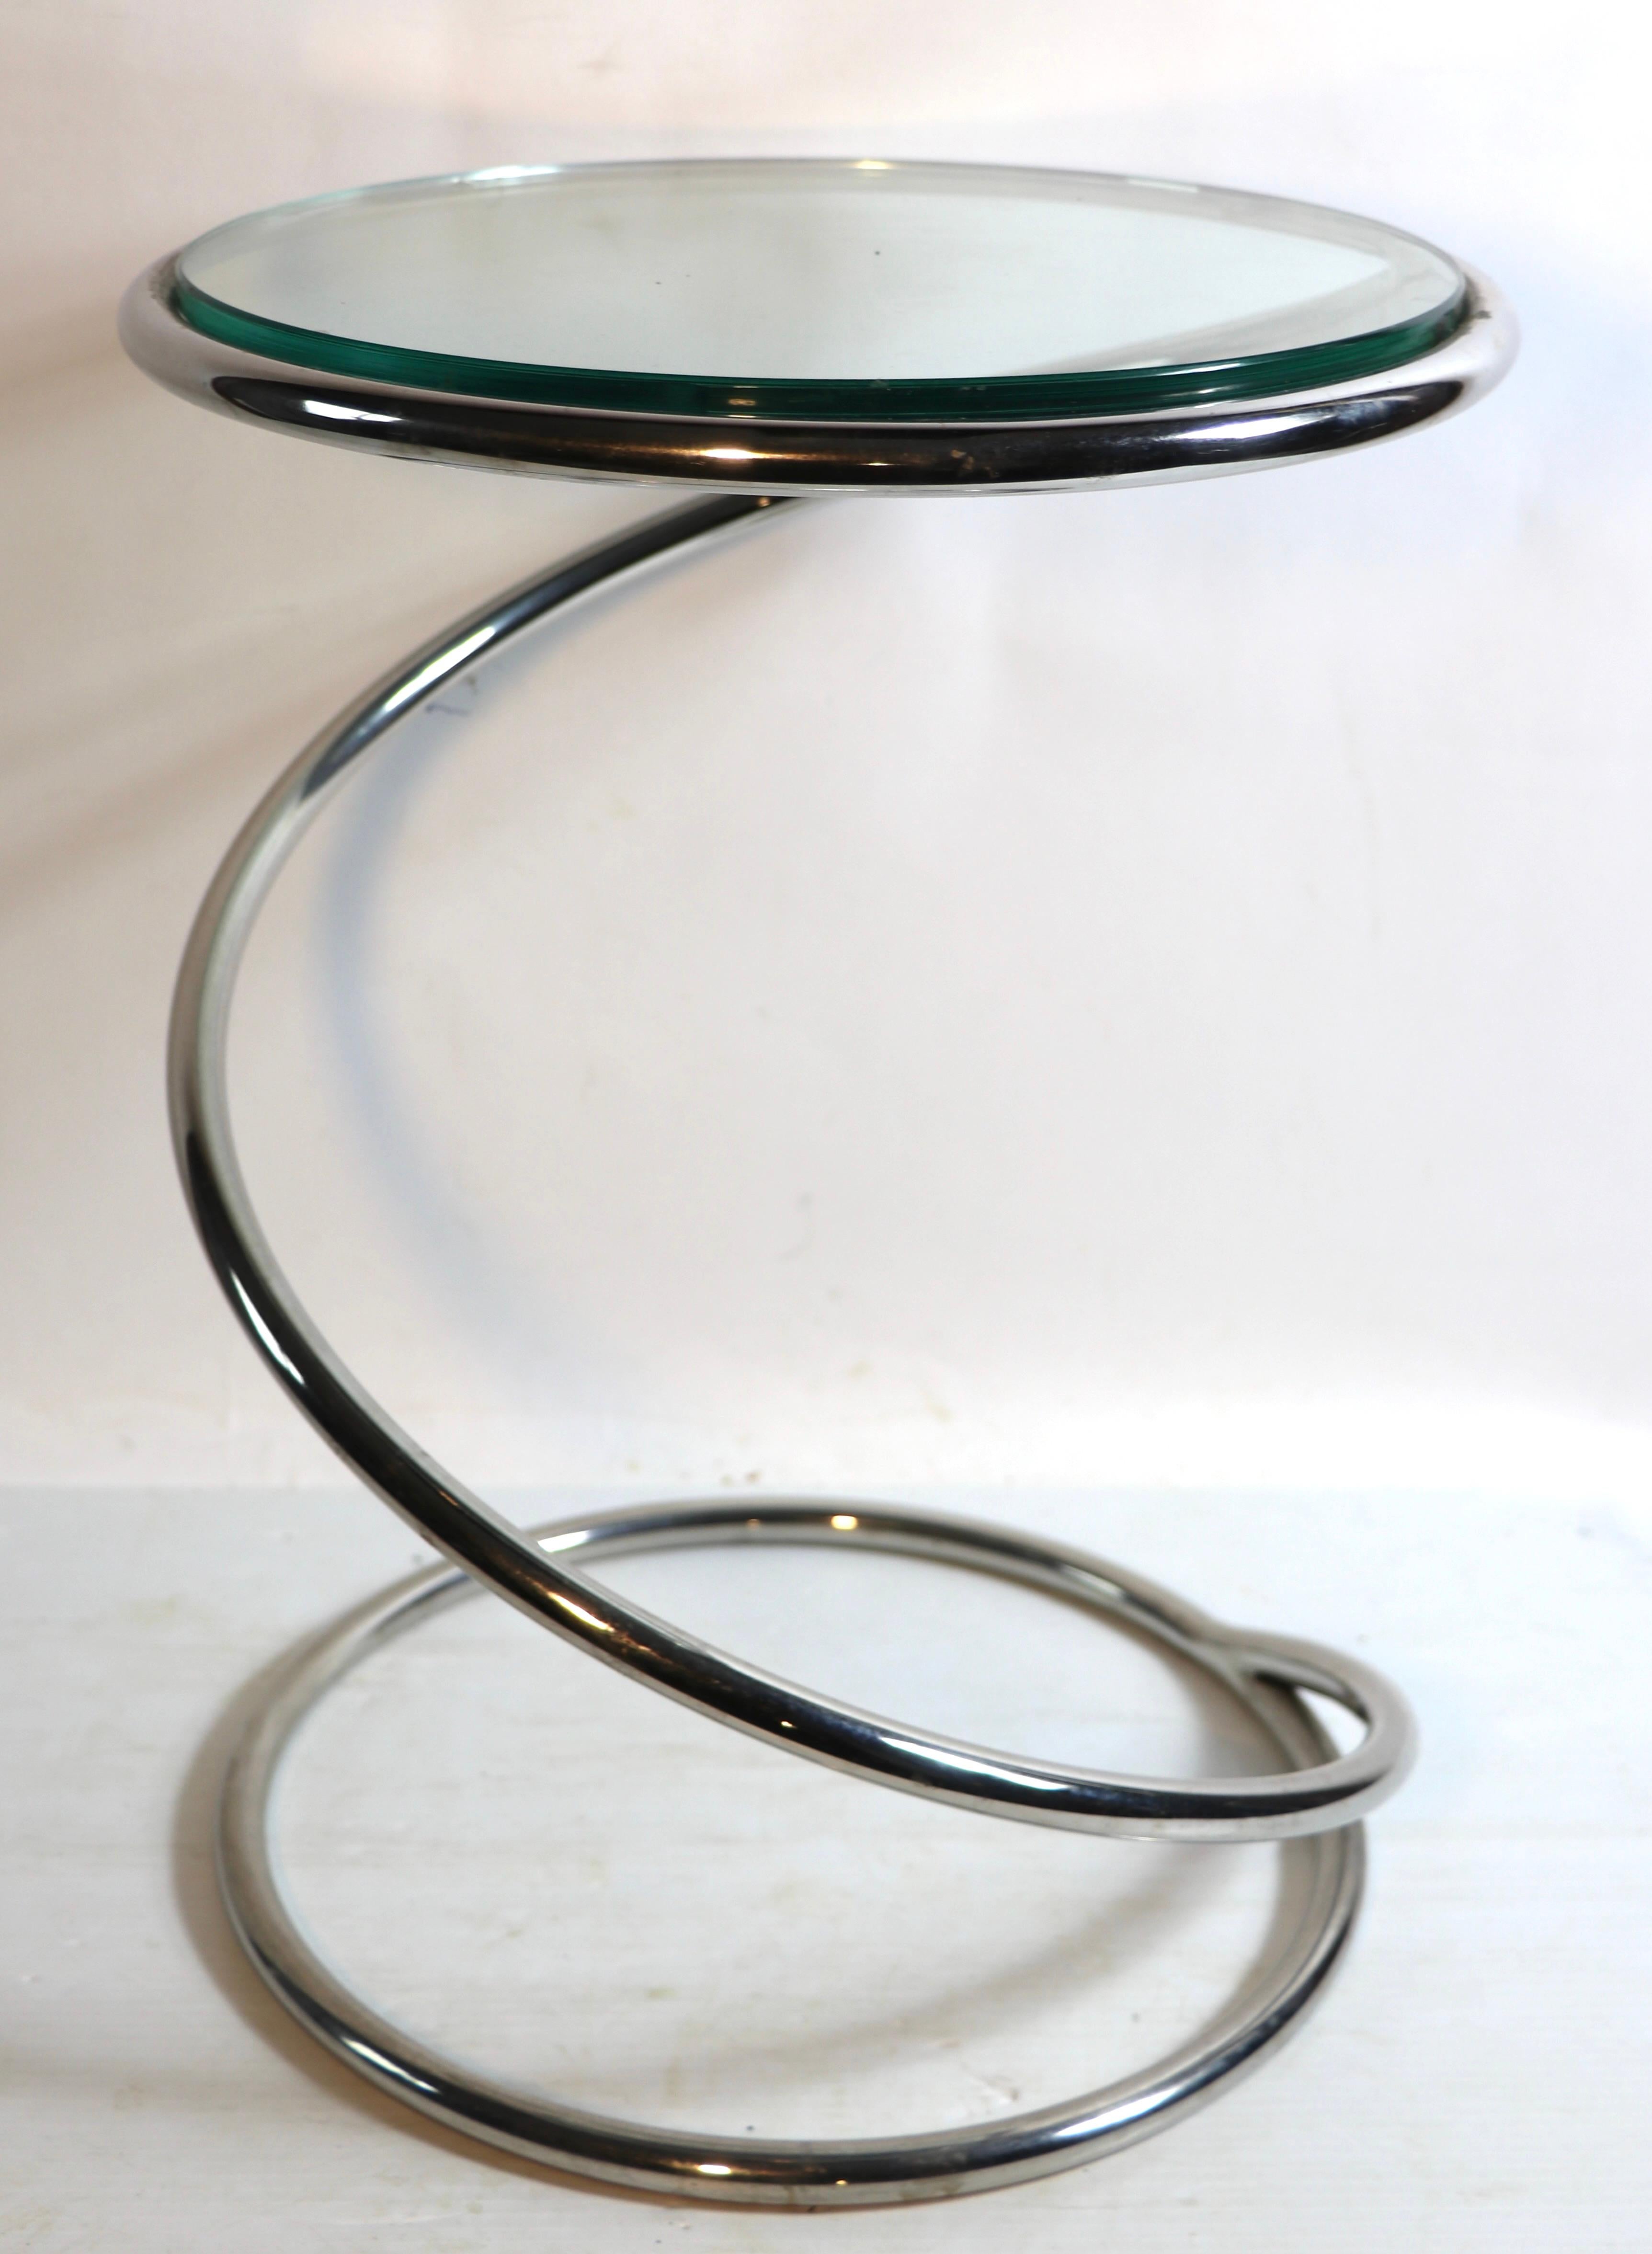 American Chrome Spiral Coil Table by Pace For Sale